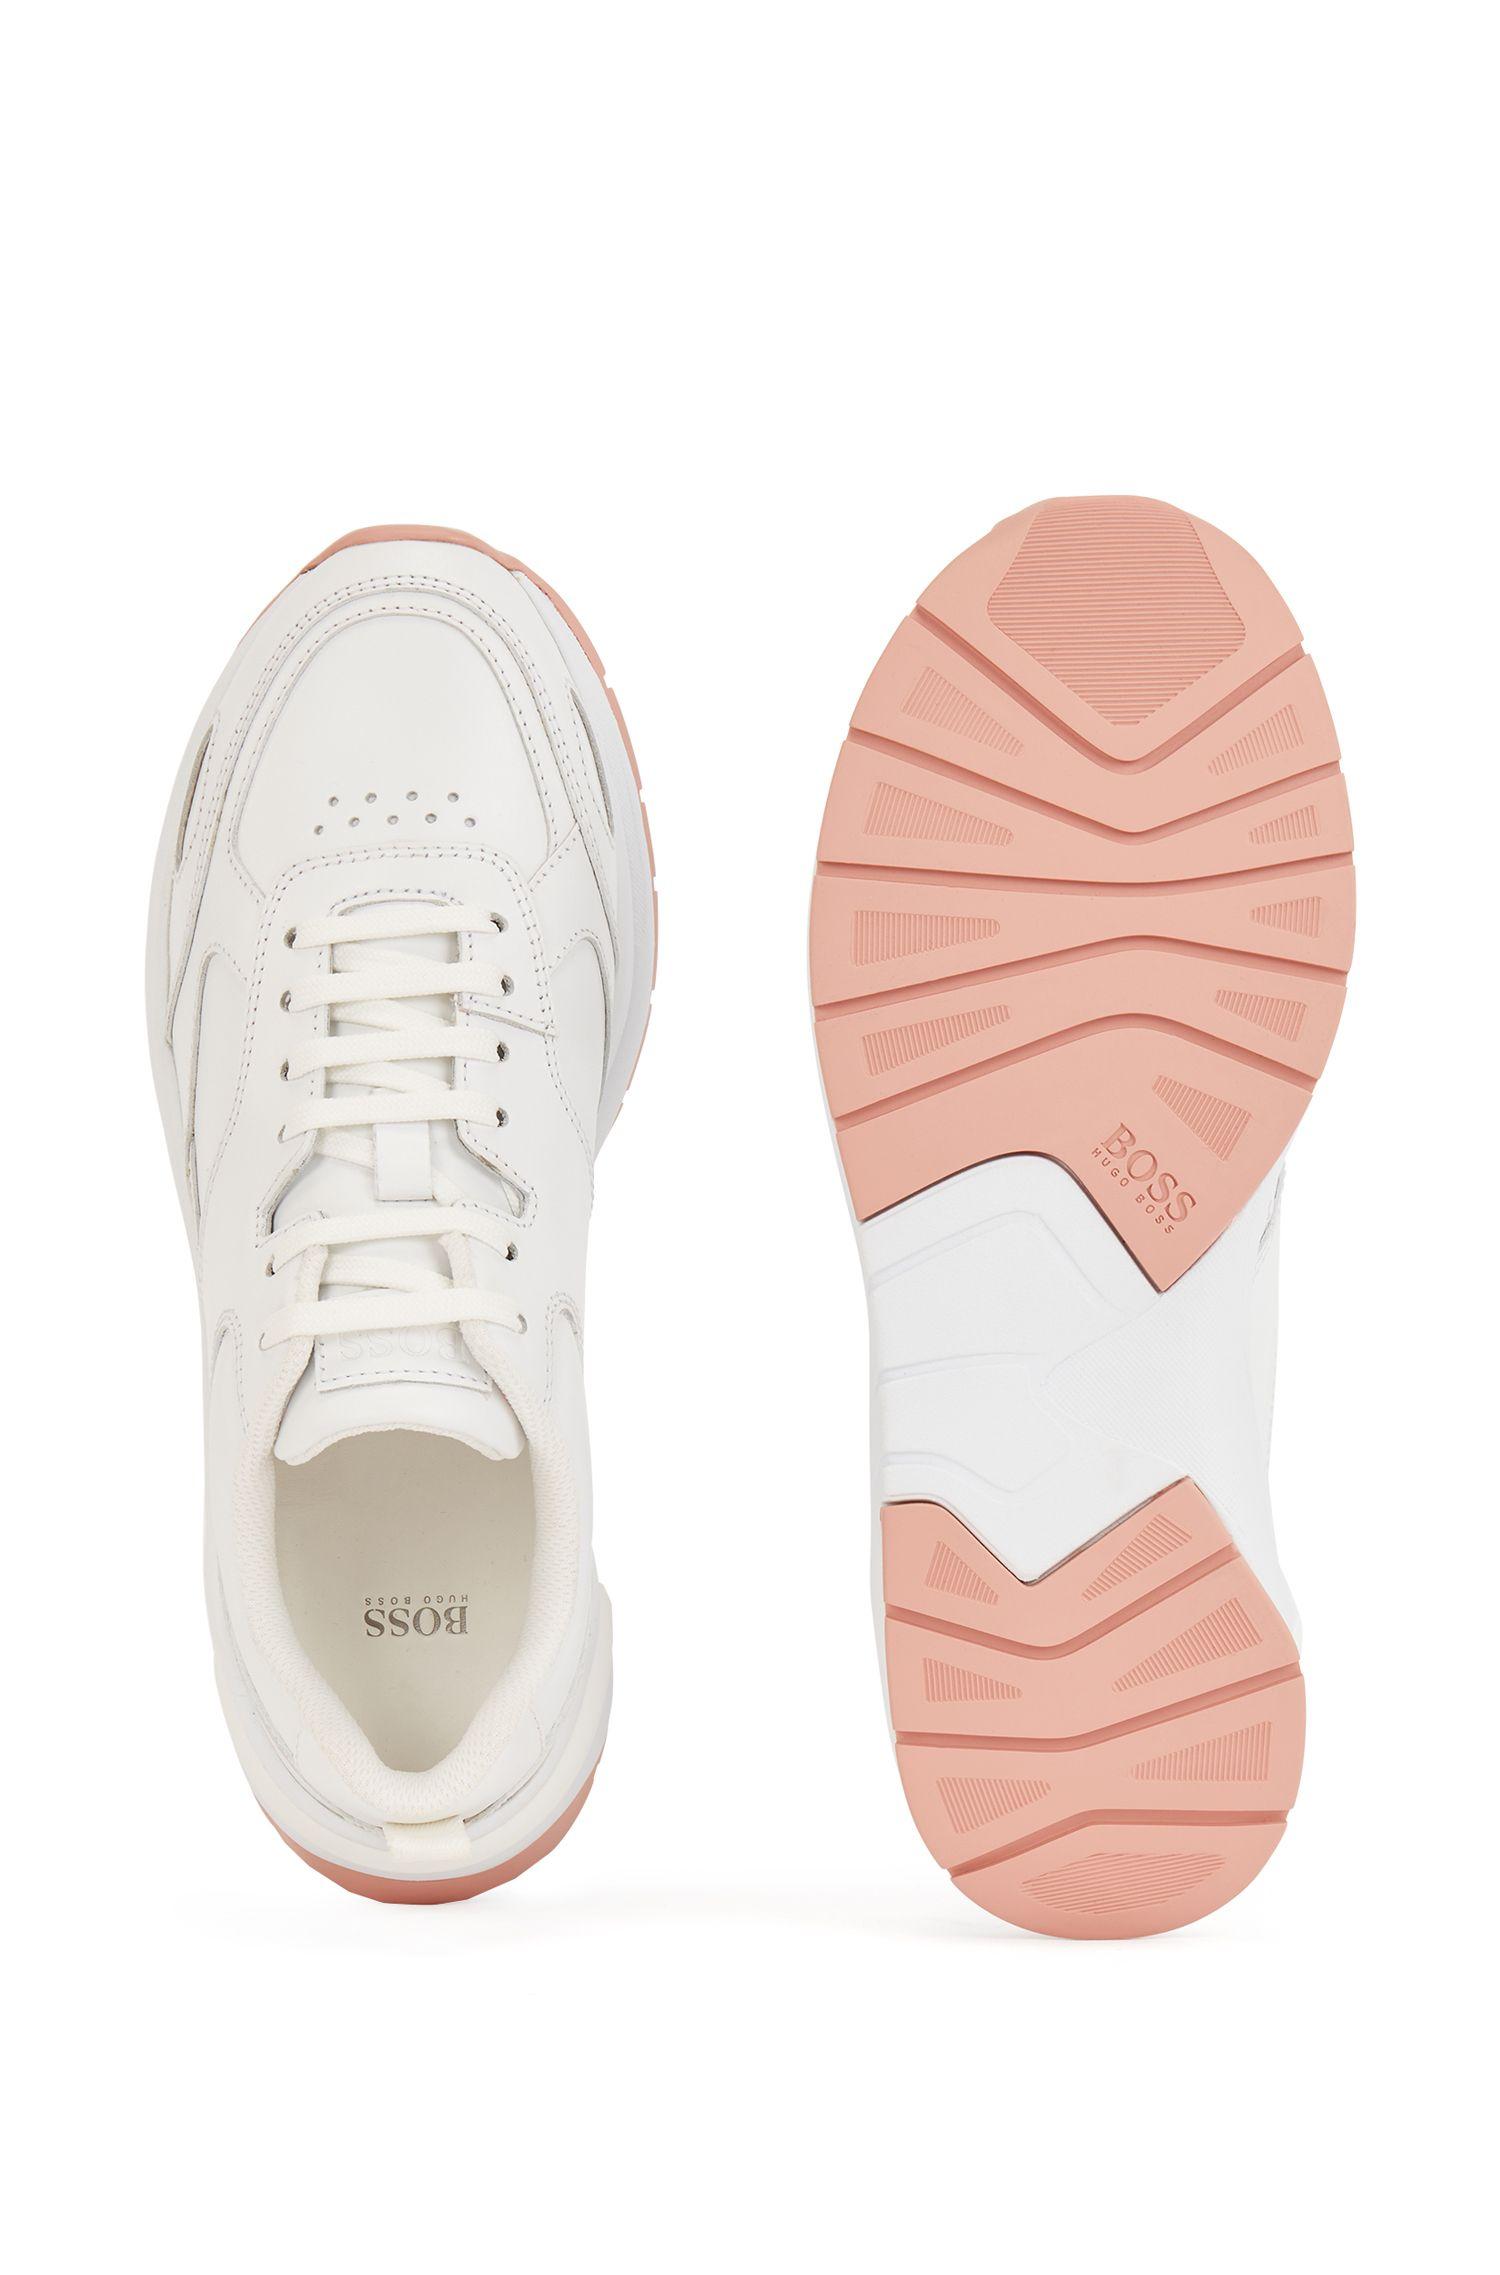 BOSS by Hugo Boss Suede Low Top Trainers In Mixed Leathers in White - Lyst